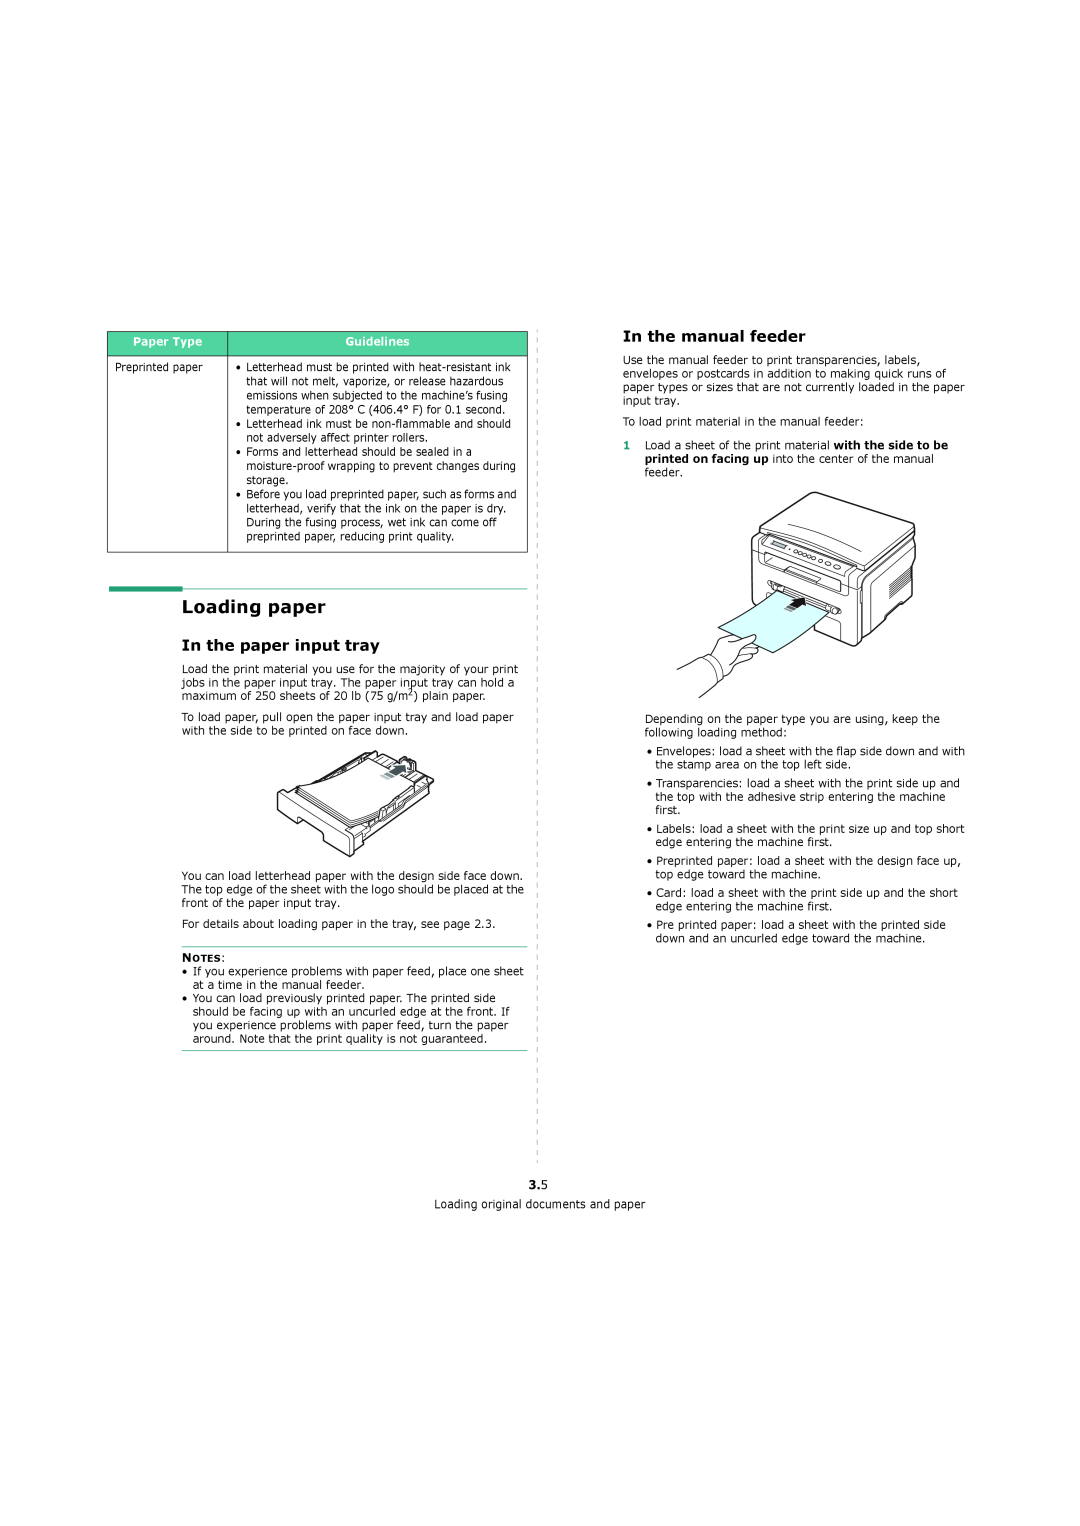 Xerox 3119 Loading paper, In the paper input tray, In the manual feeder 